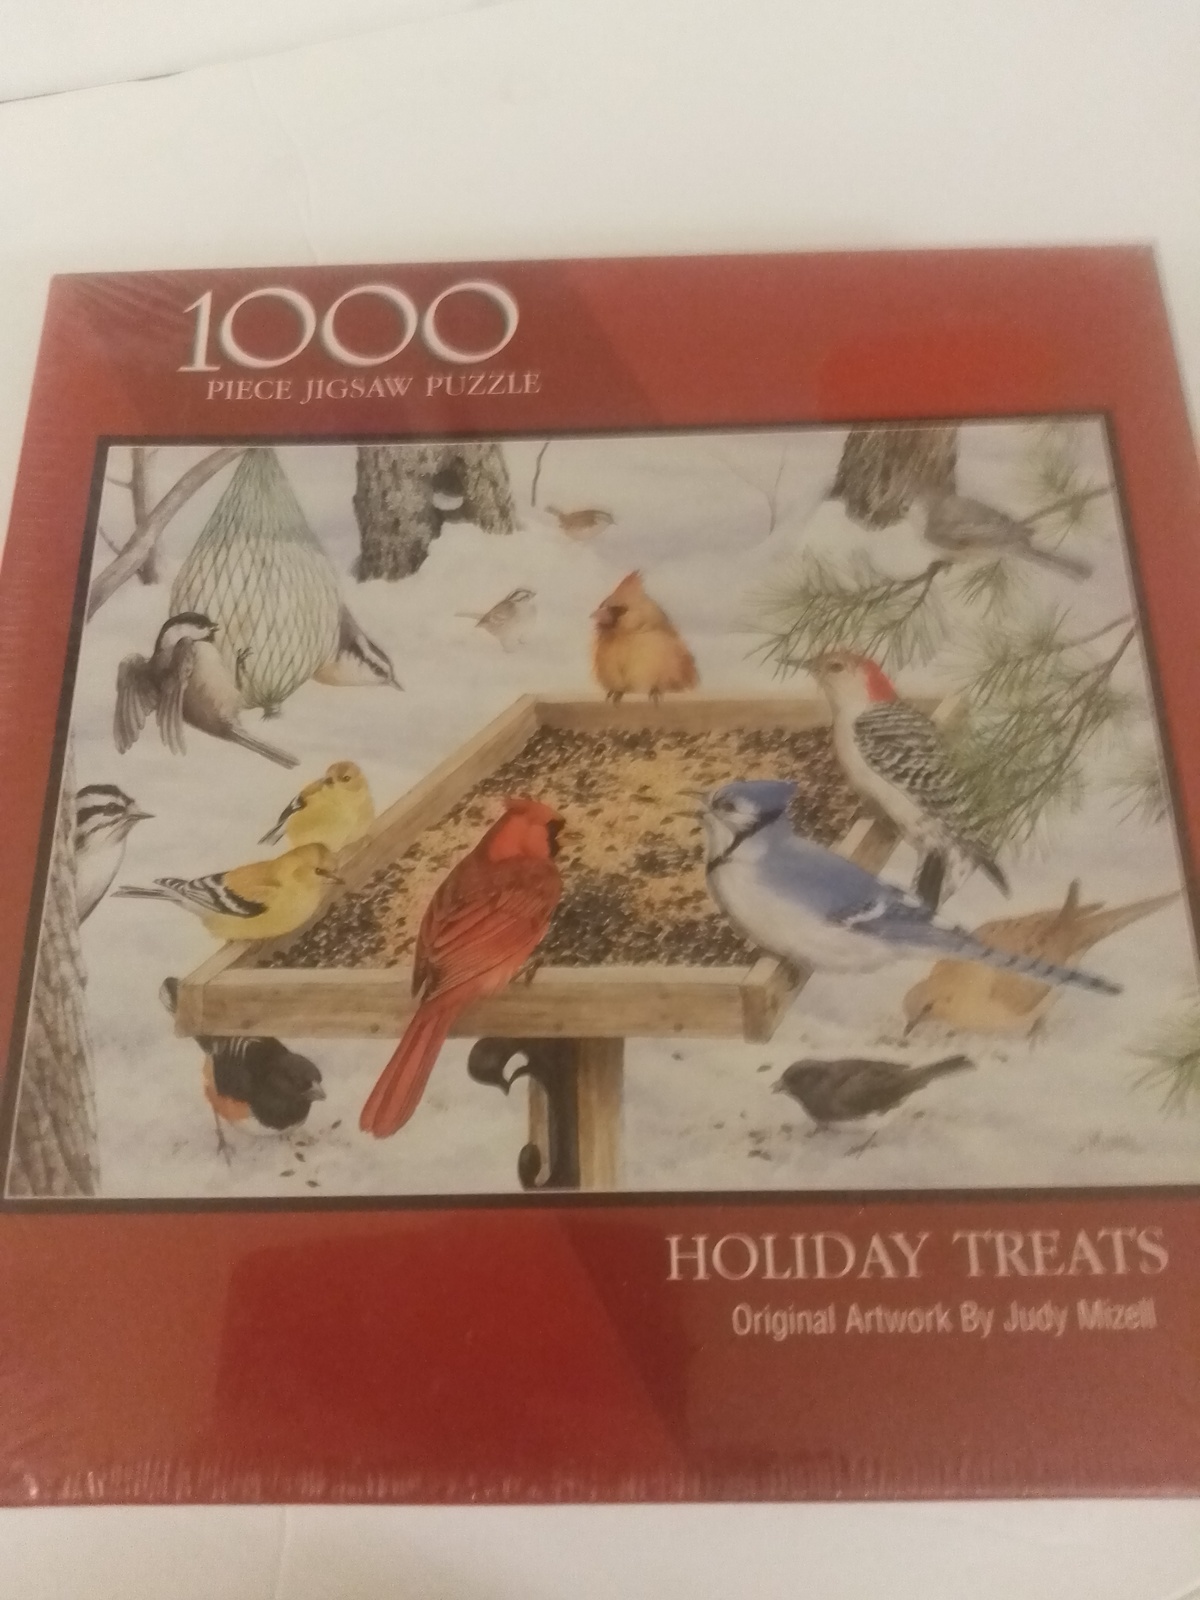 Bits And Pieces Holiday Treats 1000 Piece Jigsaw Puzzle 20" x 27" Brand New - $29.99